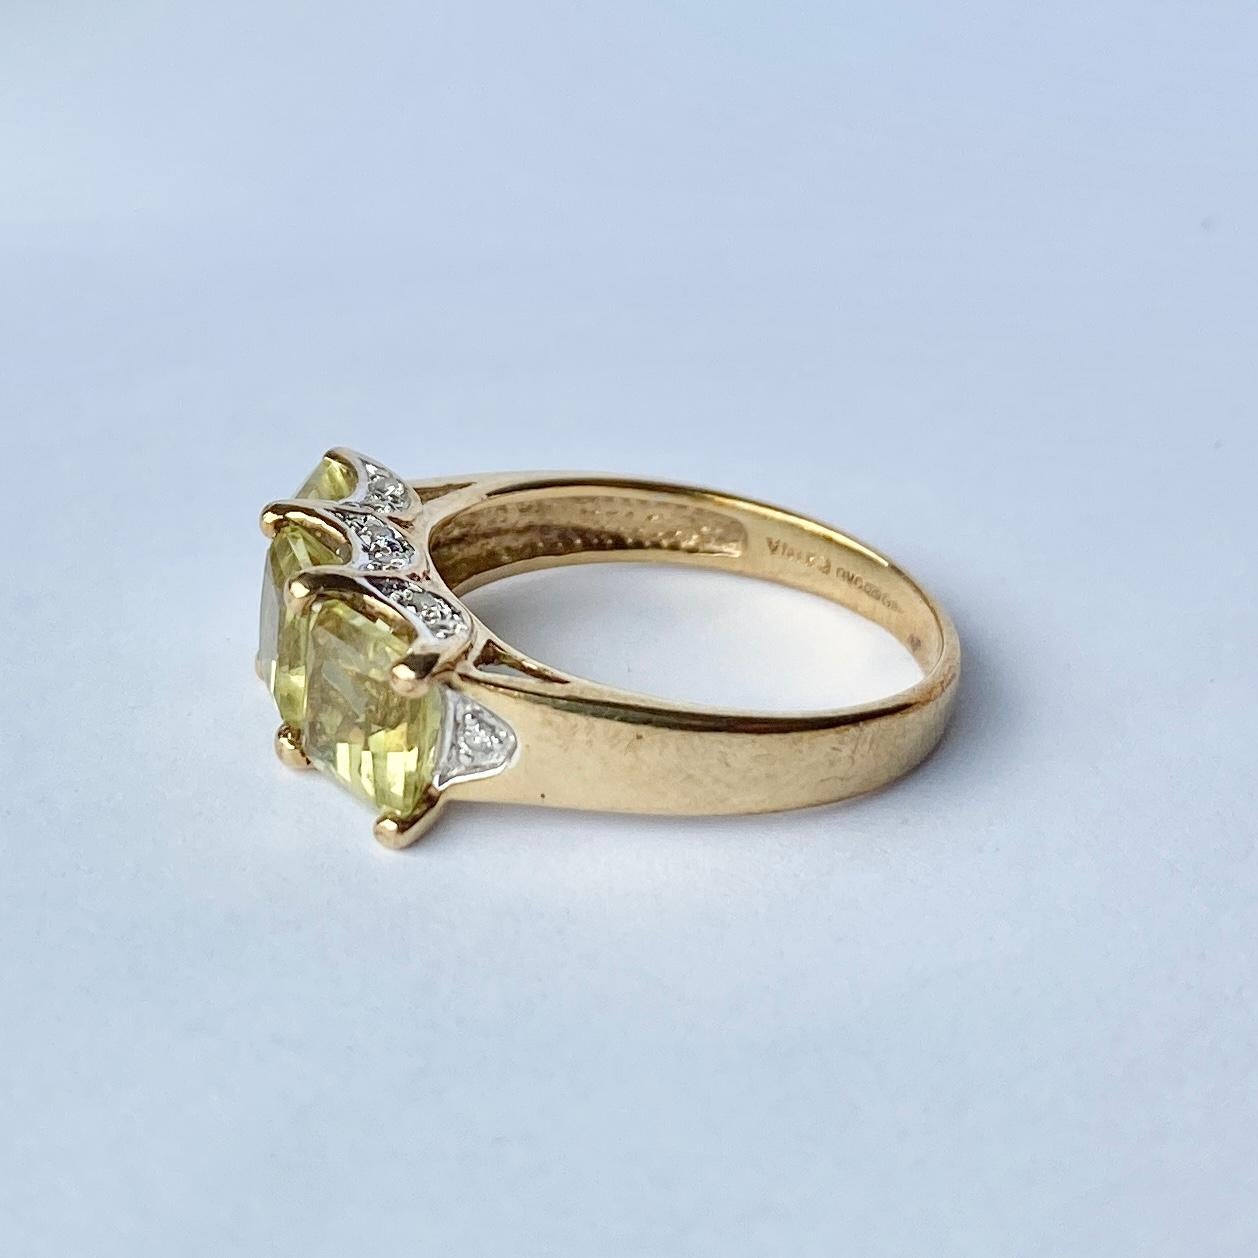 This gorgeous ring has three pale yellow citrine stones each measuring 1ct with a diamond set gallery. The ring is modelled in 9carat gold. Diamond total 30pts.

Ring Size: Q or 8

Weight: 3.6g